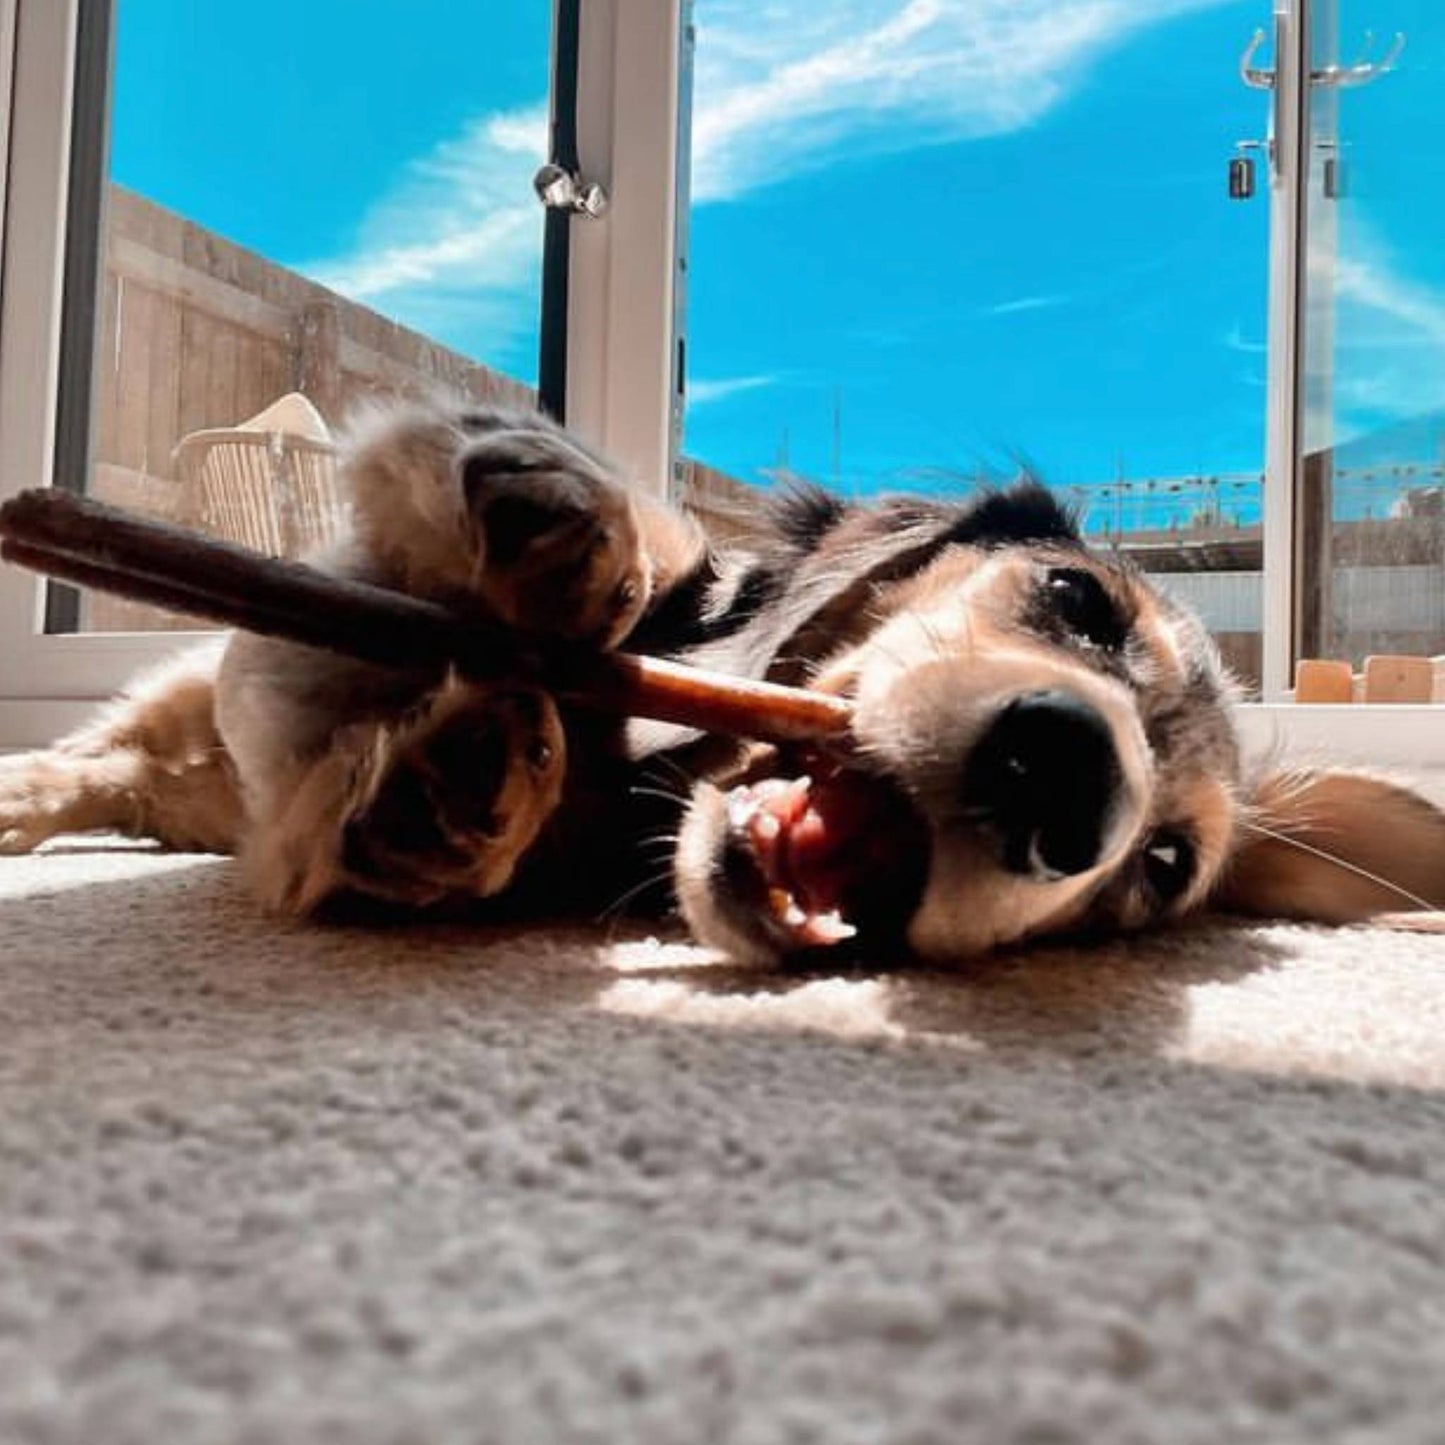 Dog eating a bully stick